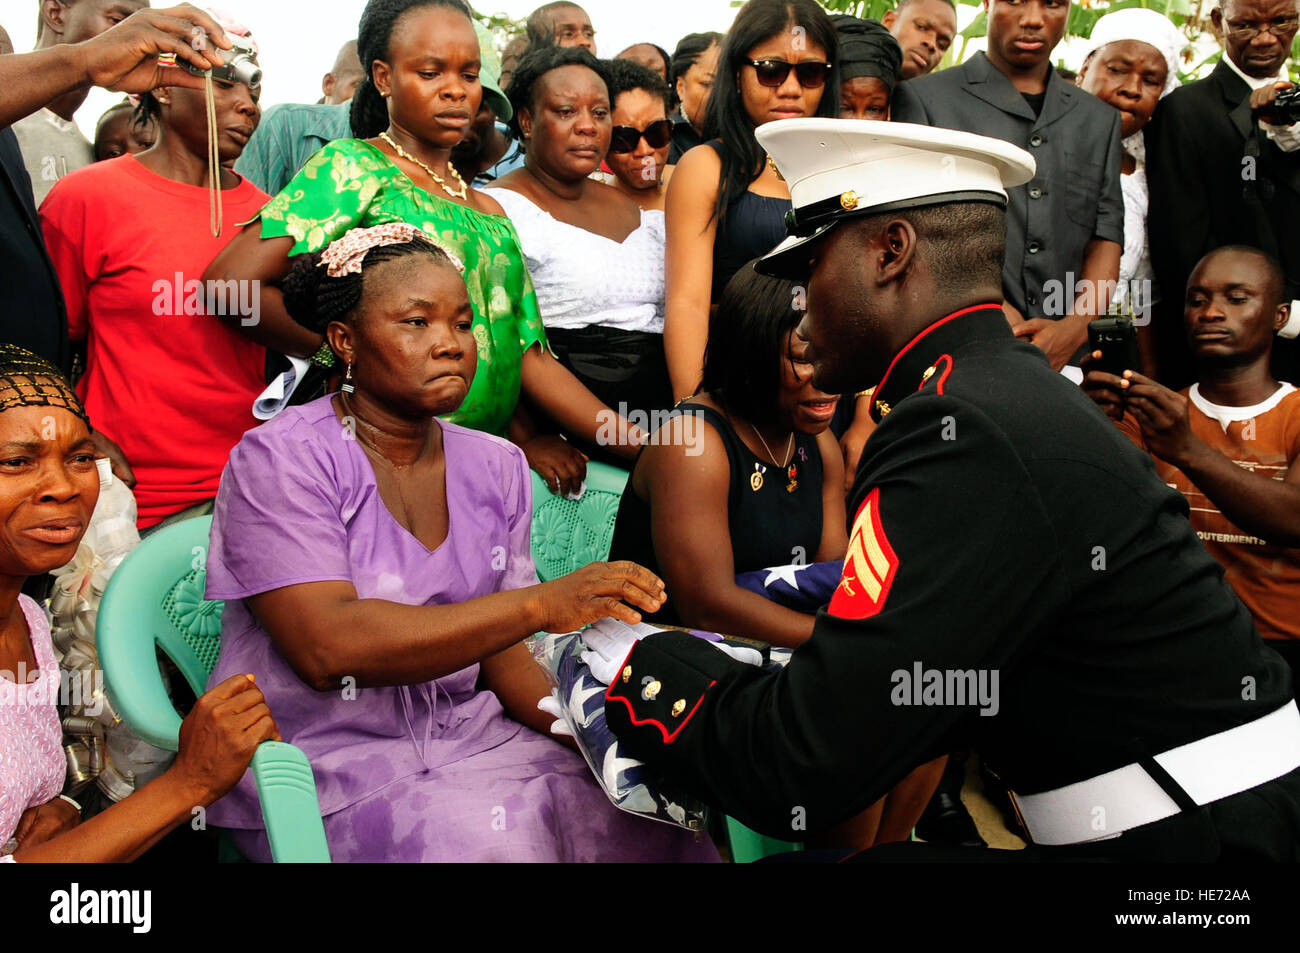 U.S. Marine Corps Cpl. Michael Wiles, right, presents a U.S. flag to Famata Kar, the mother of Lance Cpl. Abraham Tarwoe, at a memorial service in Flehla, Liberia, May 17, 2012. Tarwoe, who was born in Liberia but immigrated to the United States before joining the Marine Corps, died from wounds suffered in combat in Helmand province, Afghanistan, April 12, 2012. Wiles escorted Tarwoe’s body back to Liberia. Tarwoe was with the 2nd Battalion, 9th Marine Regiment and Wiles was with the 2nd Marine Special Operations Battalion.  1st Lt. Mark Lazane, U.S. Air Force Stock Photo